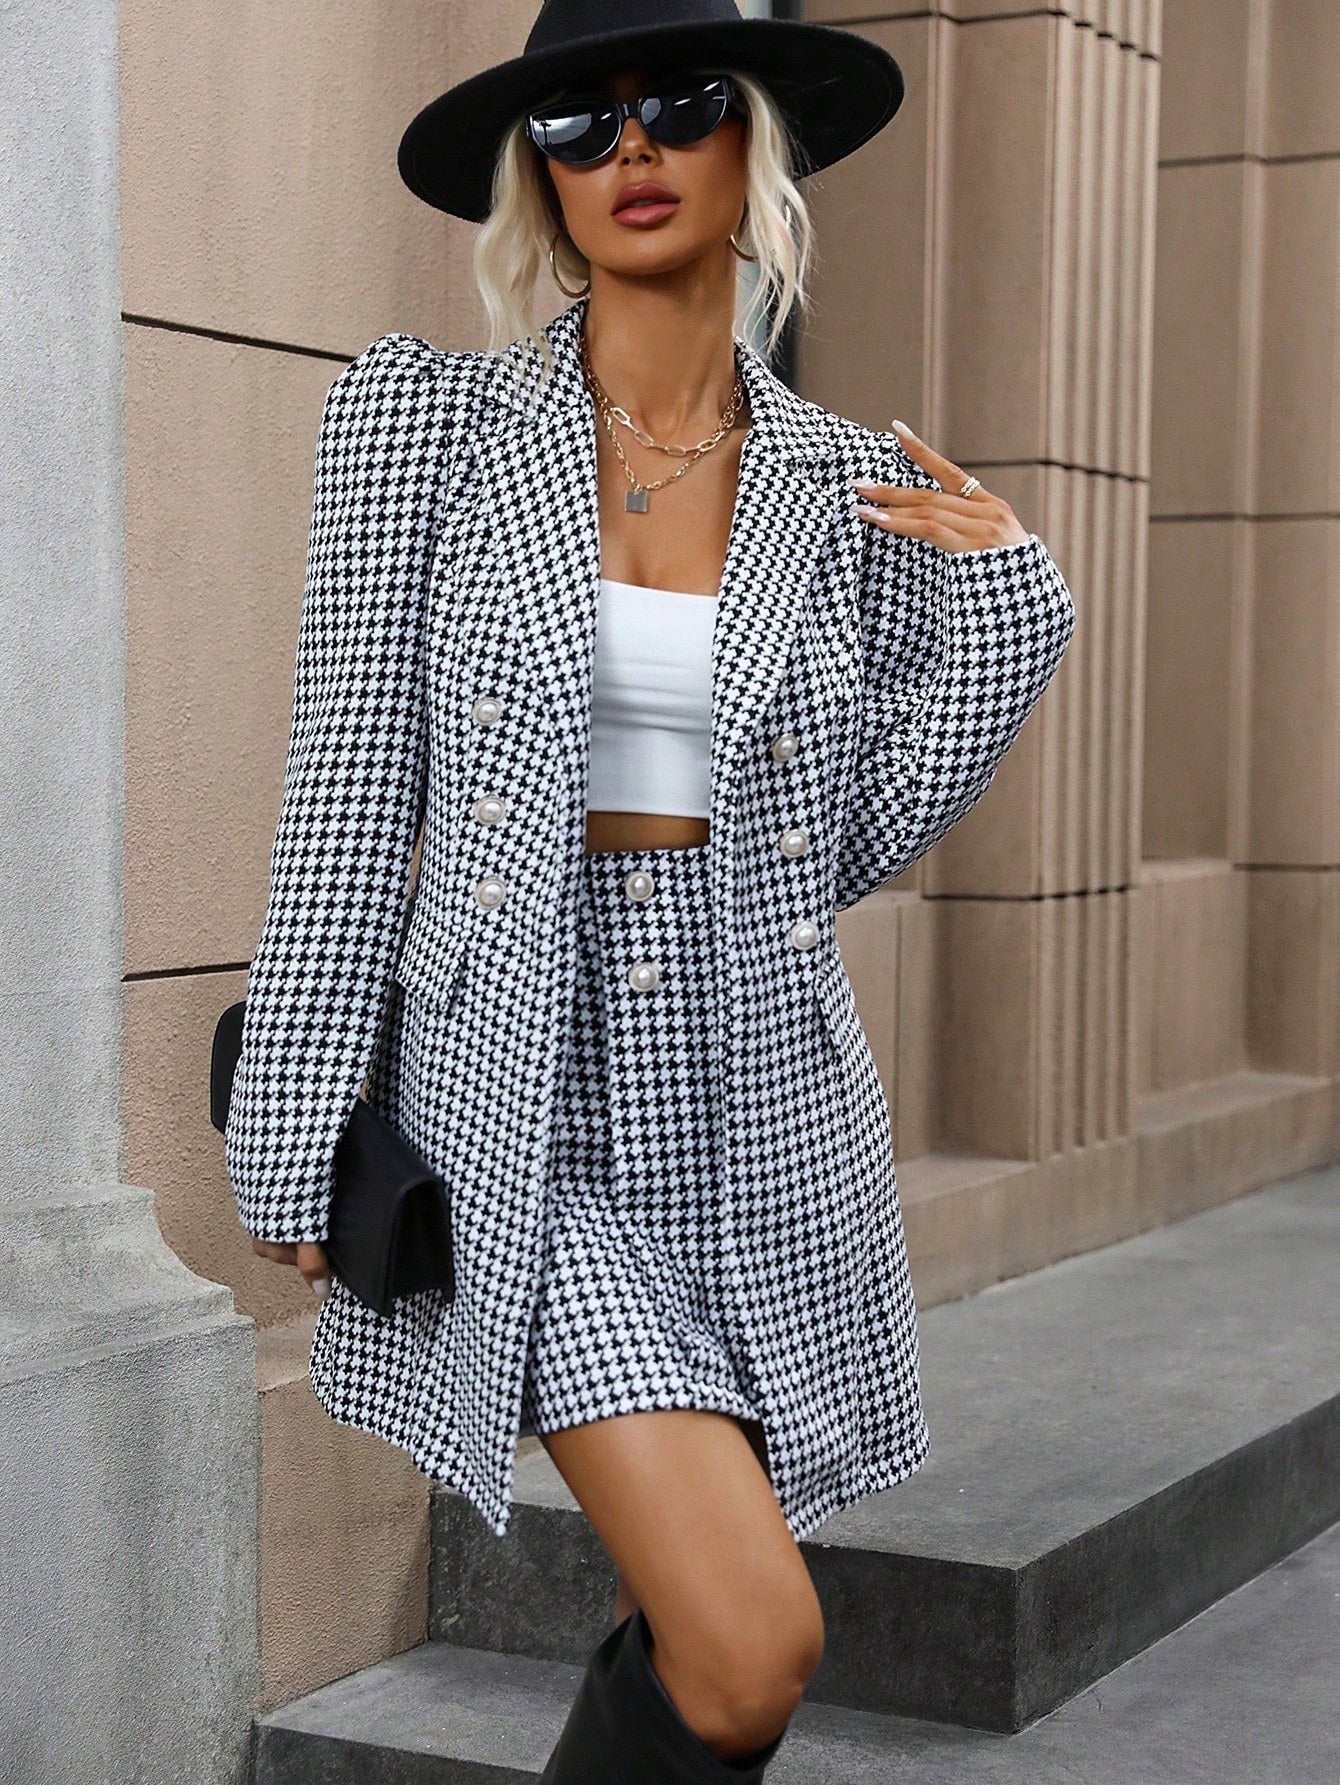 Classic Houndstooth Double-Breasted Blazer and Skirt Set for a Chic Timeless Look